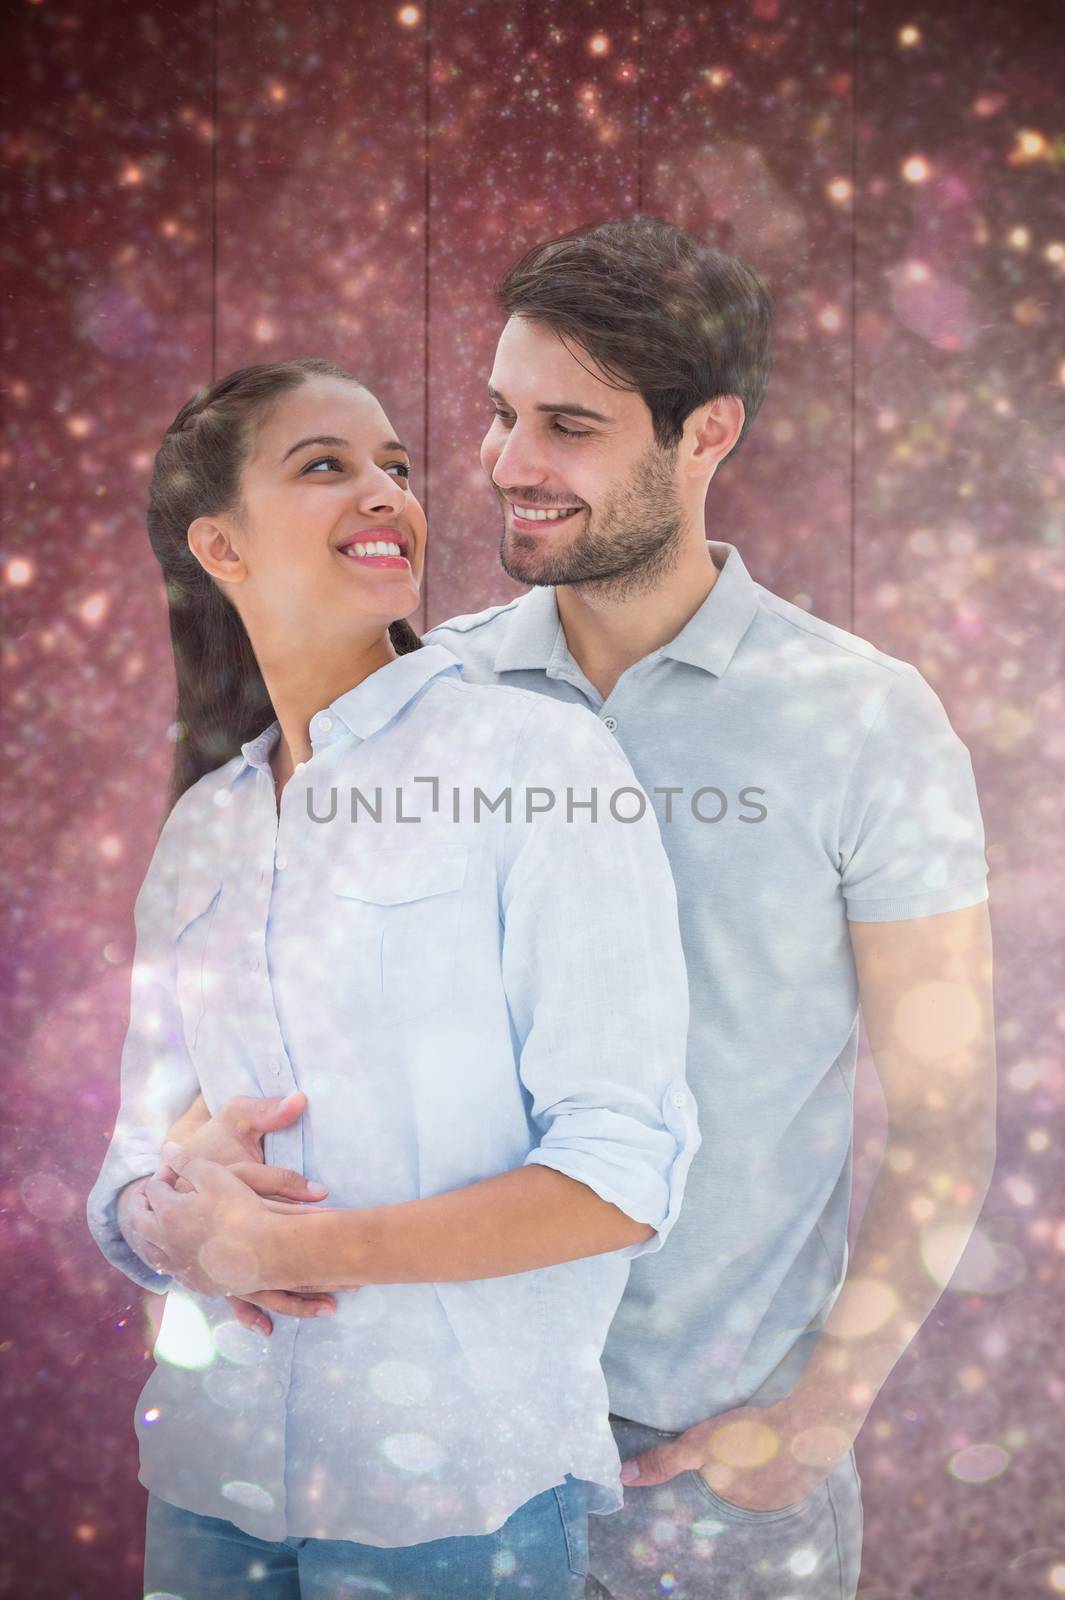 Composite image of cute couple embracing and smiling at each other by Wavebreakmedia